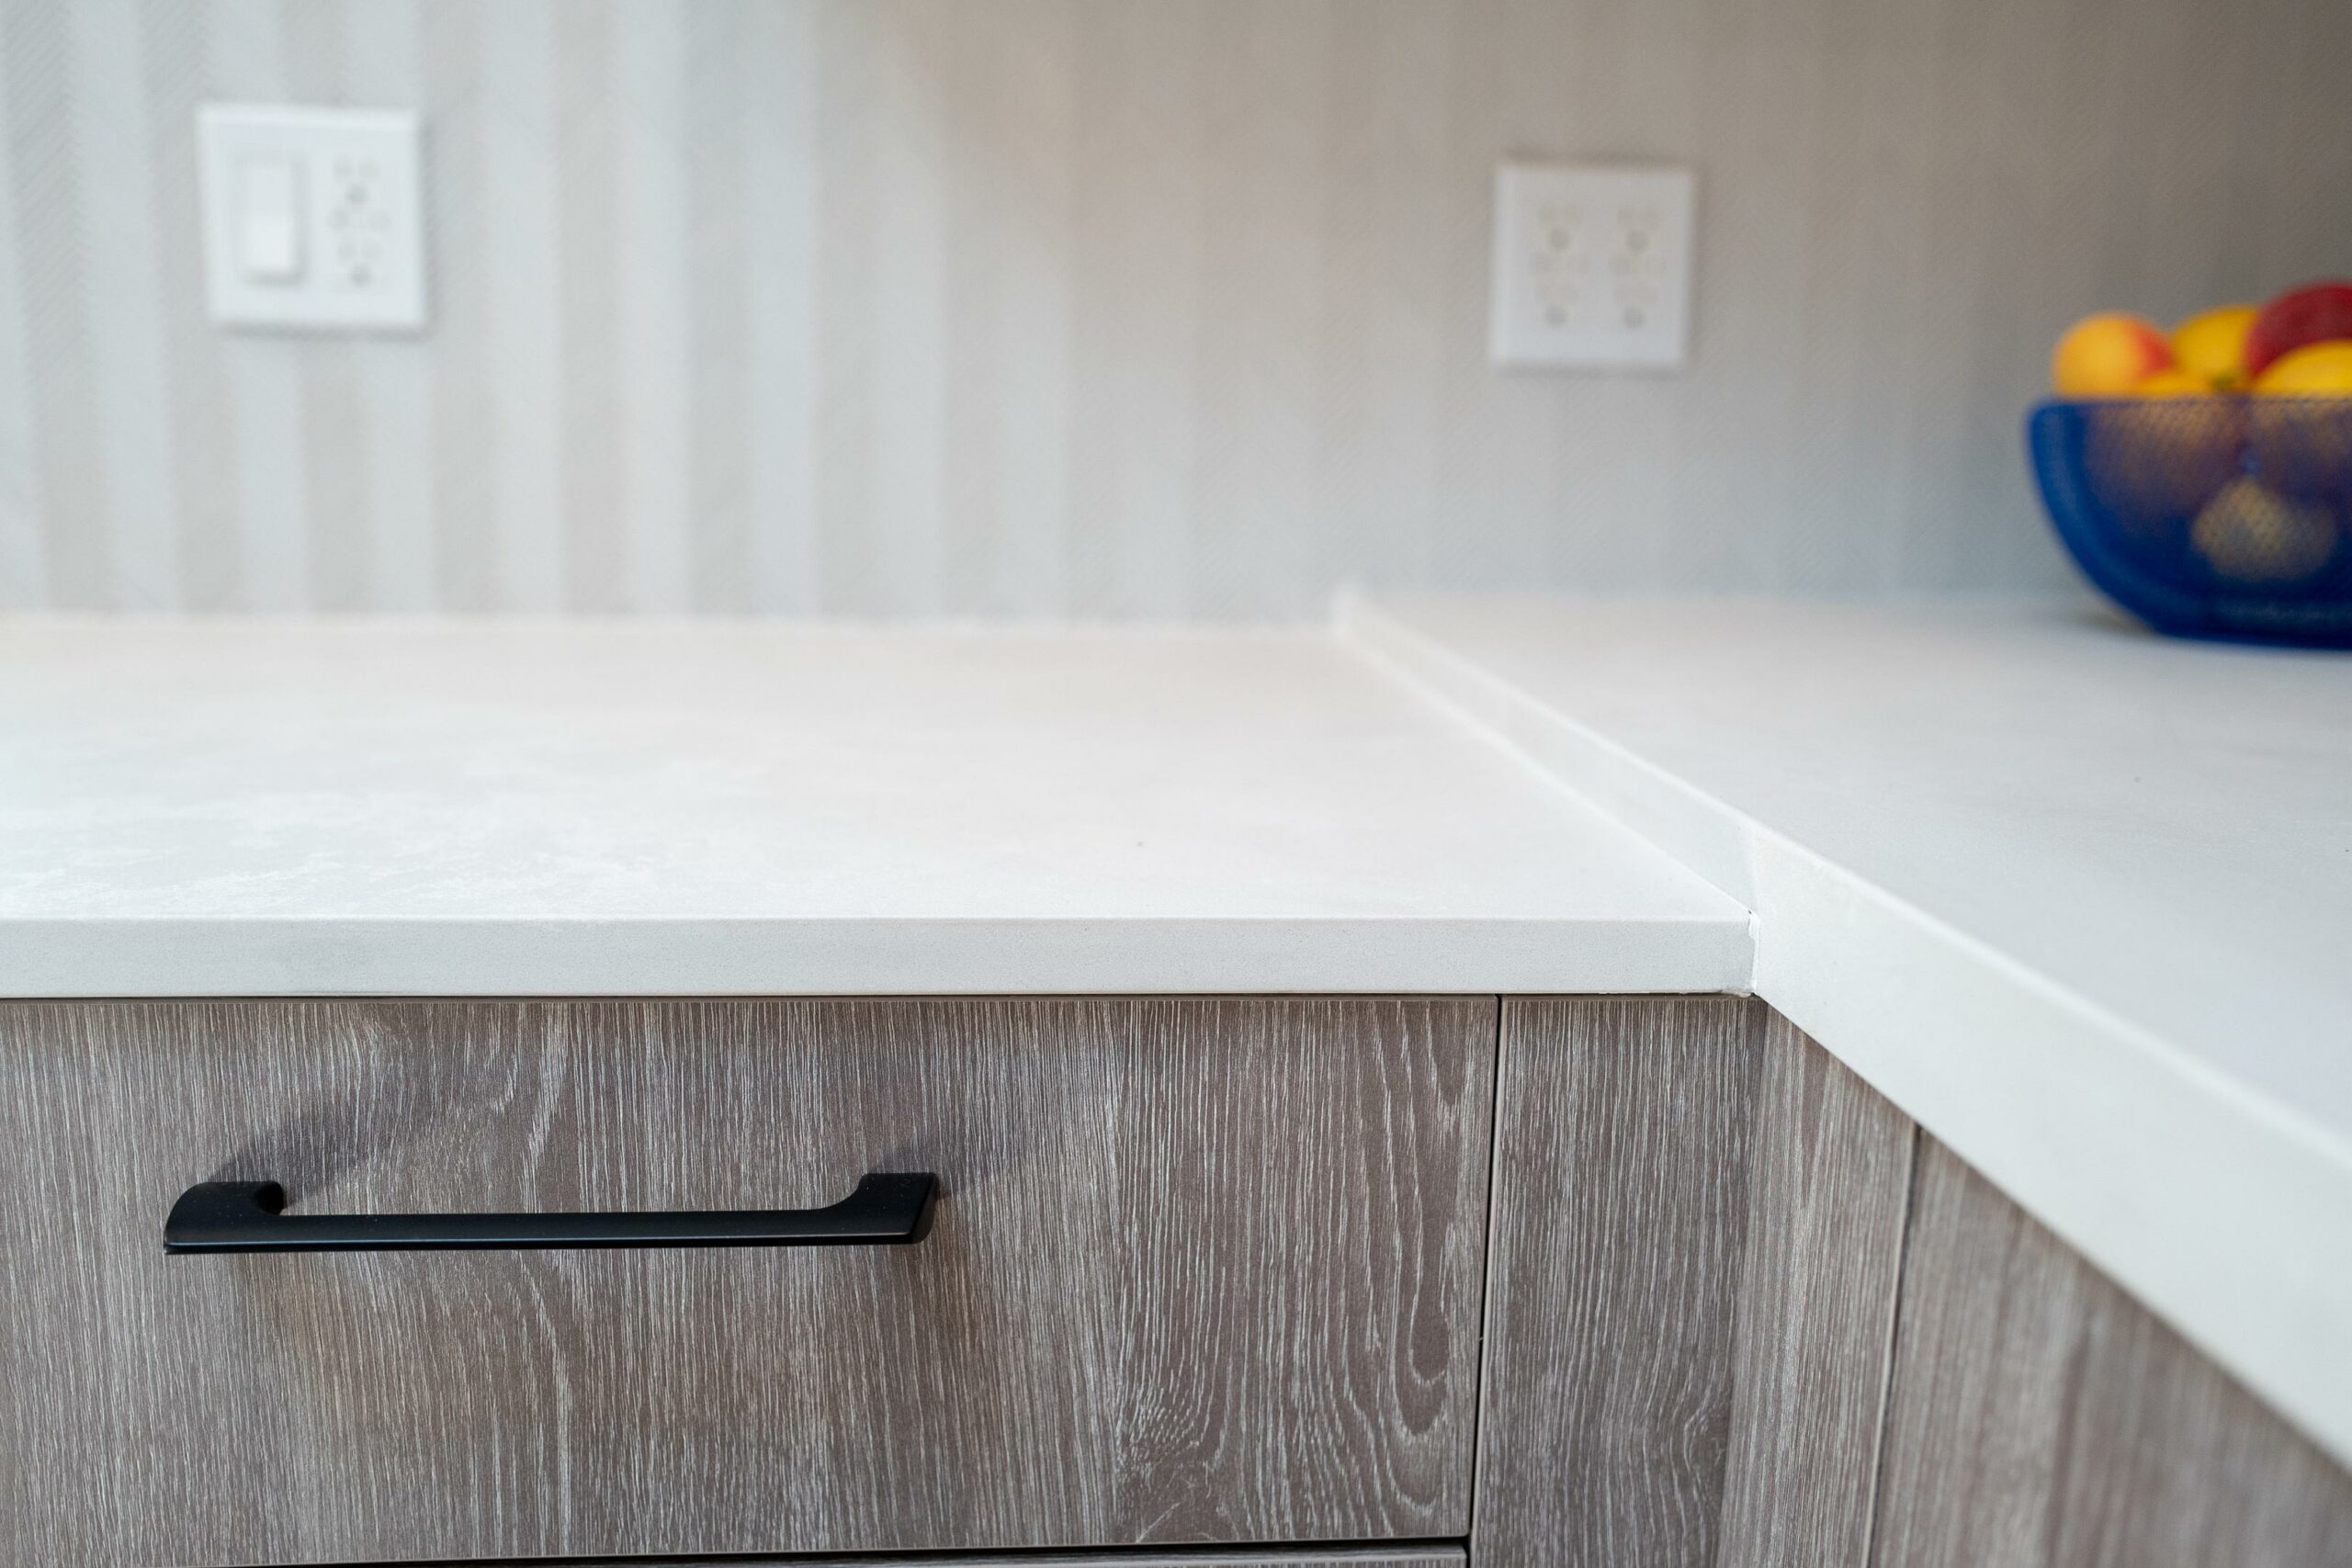 Modern kitchen counter and cabinet details